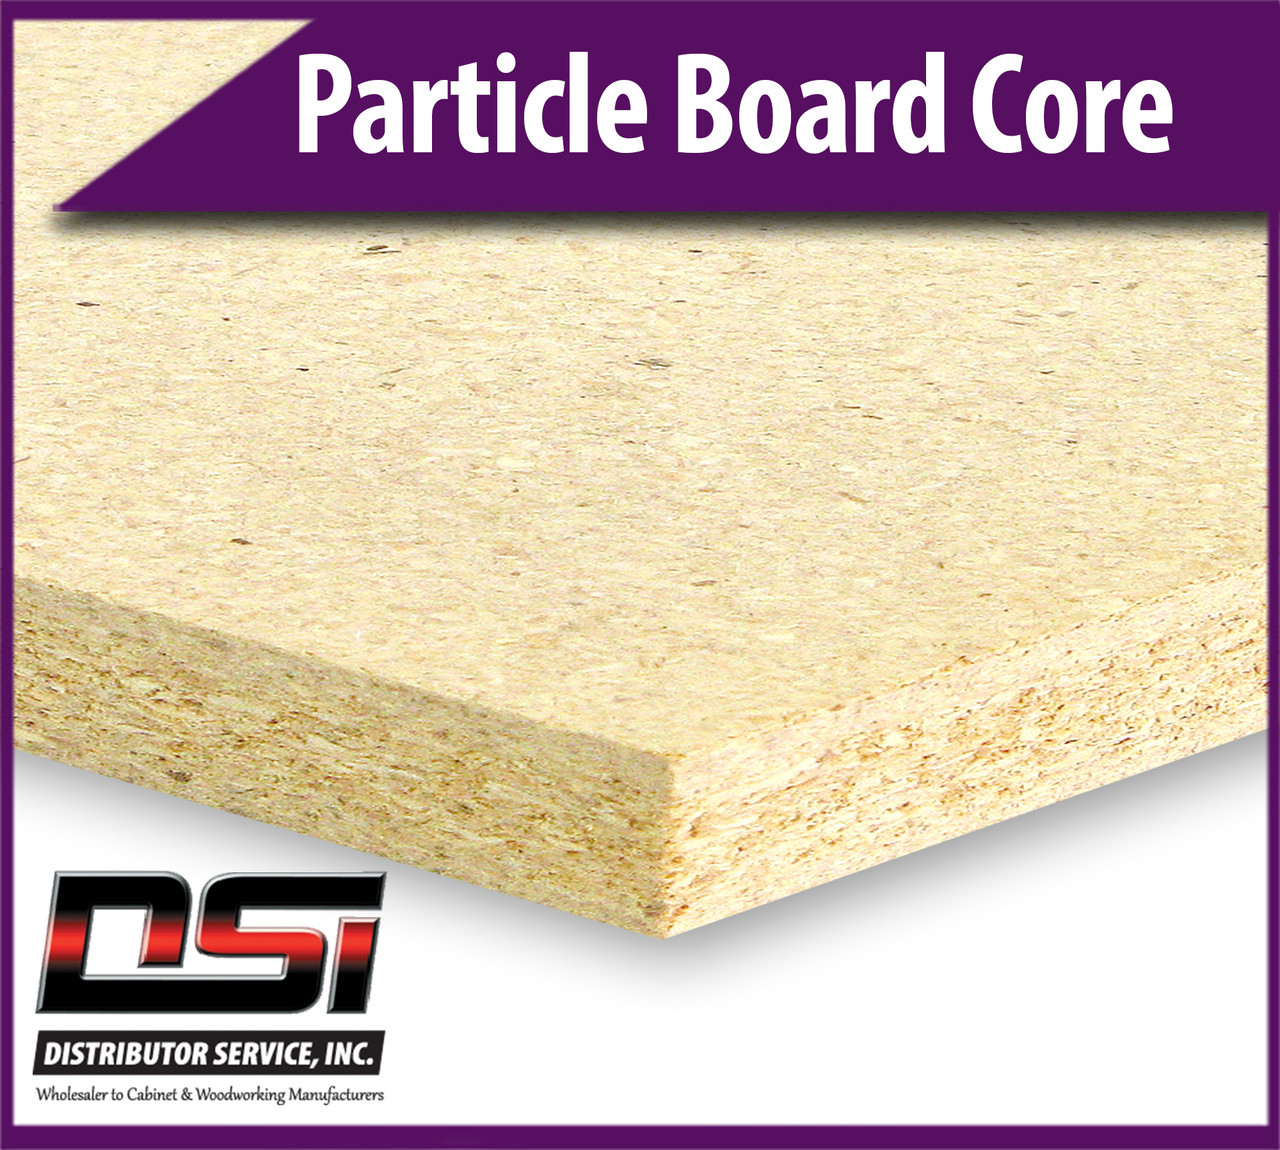 Particle Board Core 3/8" x 61" x 145" Industrial Particleboard Panels